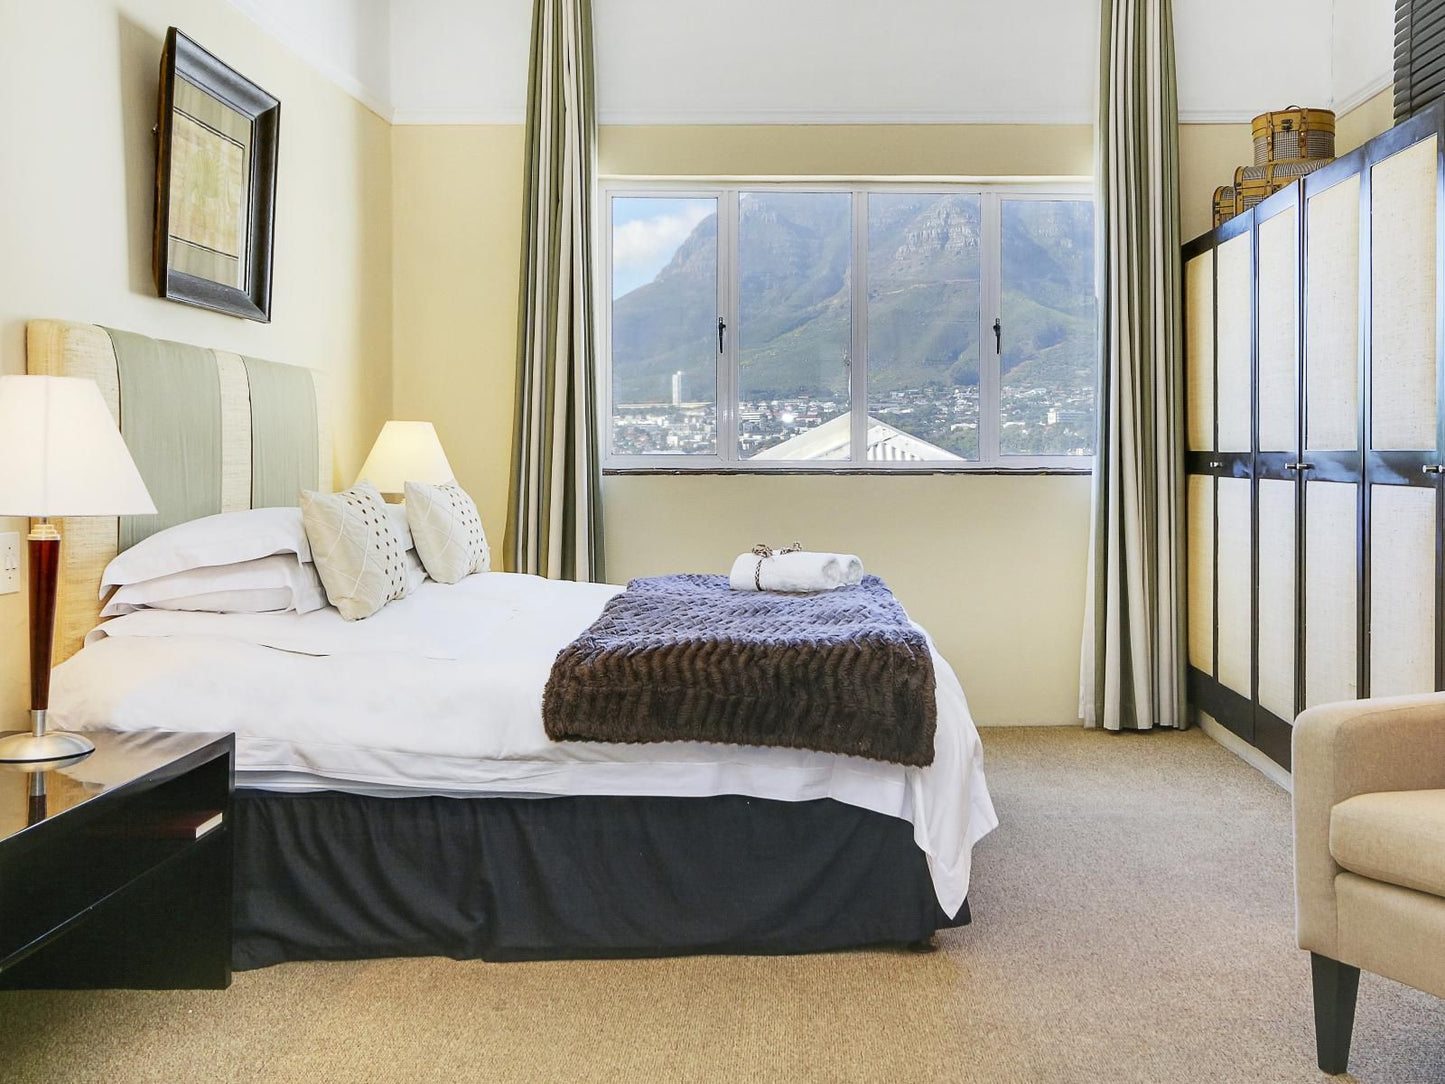 Liberty Lodge Bandb Tamboerskloof Cape Town Western Cape South Africa Bedroom